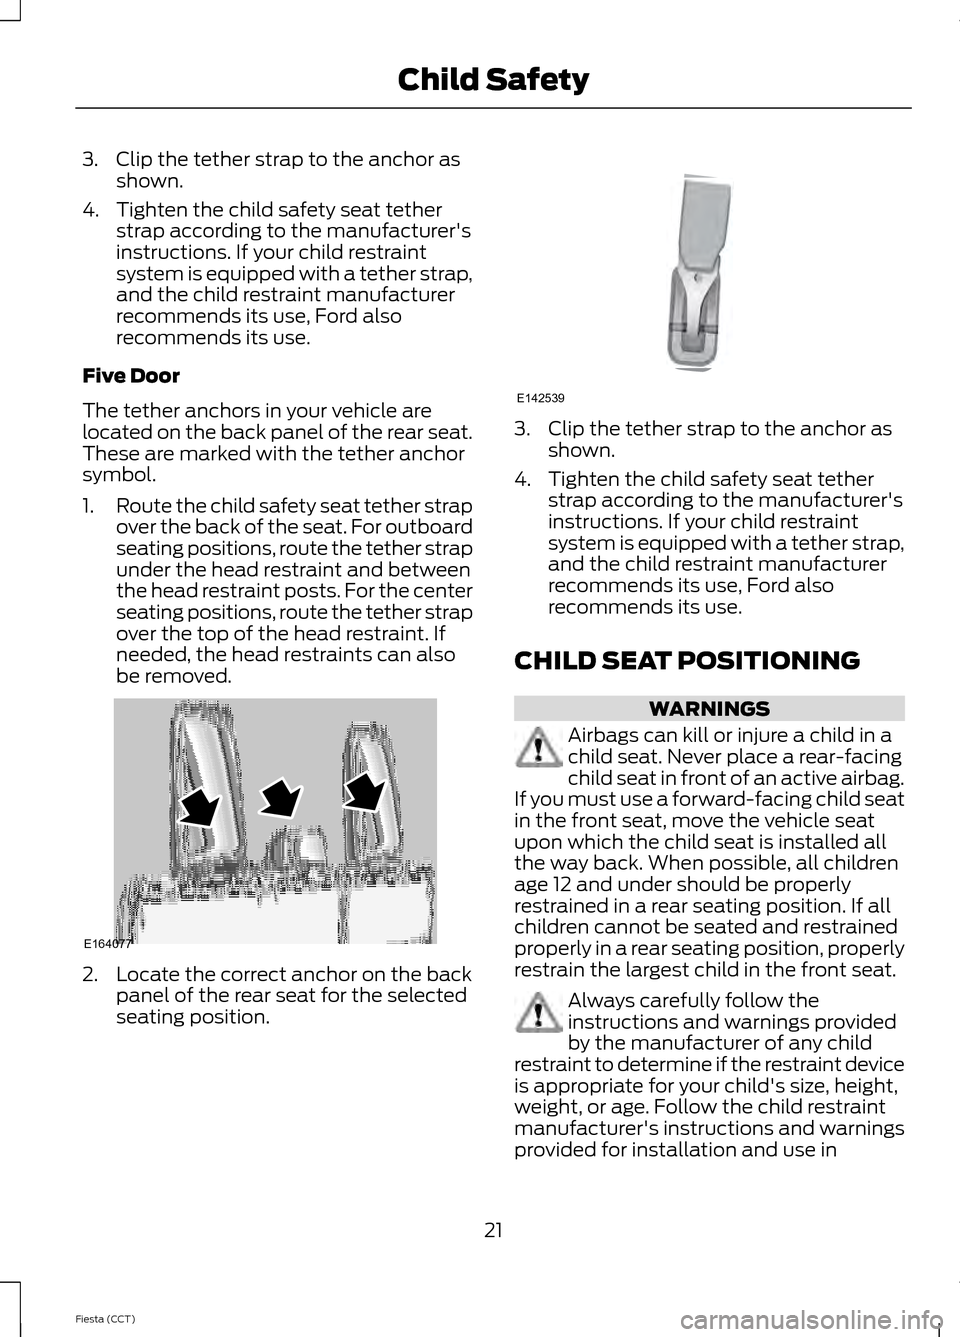 FORD FIESTA 2014 6.G Owners Manual 3. Clip the tether strap to the anchor as
shown.
4. Tighten the child safety seat tether strap according to the manufacturers
instructions. If your child restraint
system is equipped with a tether st